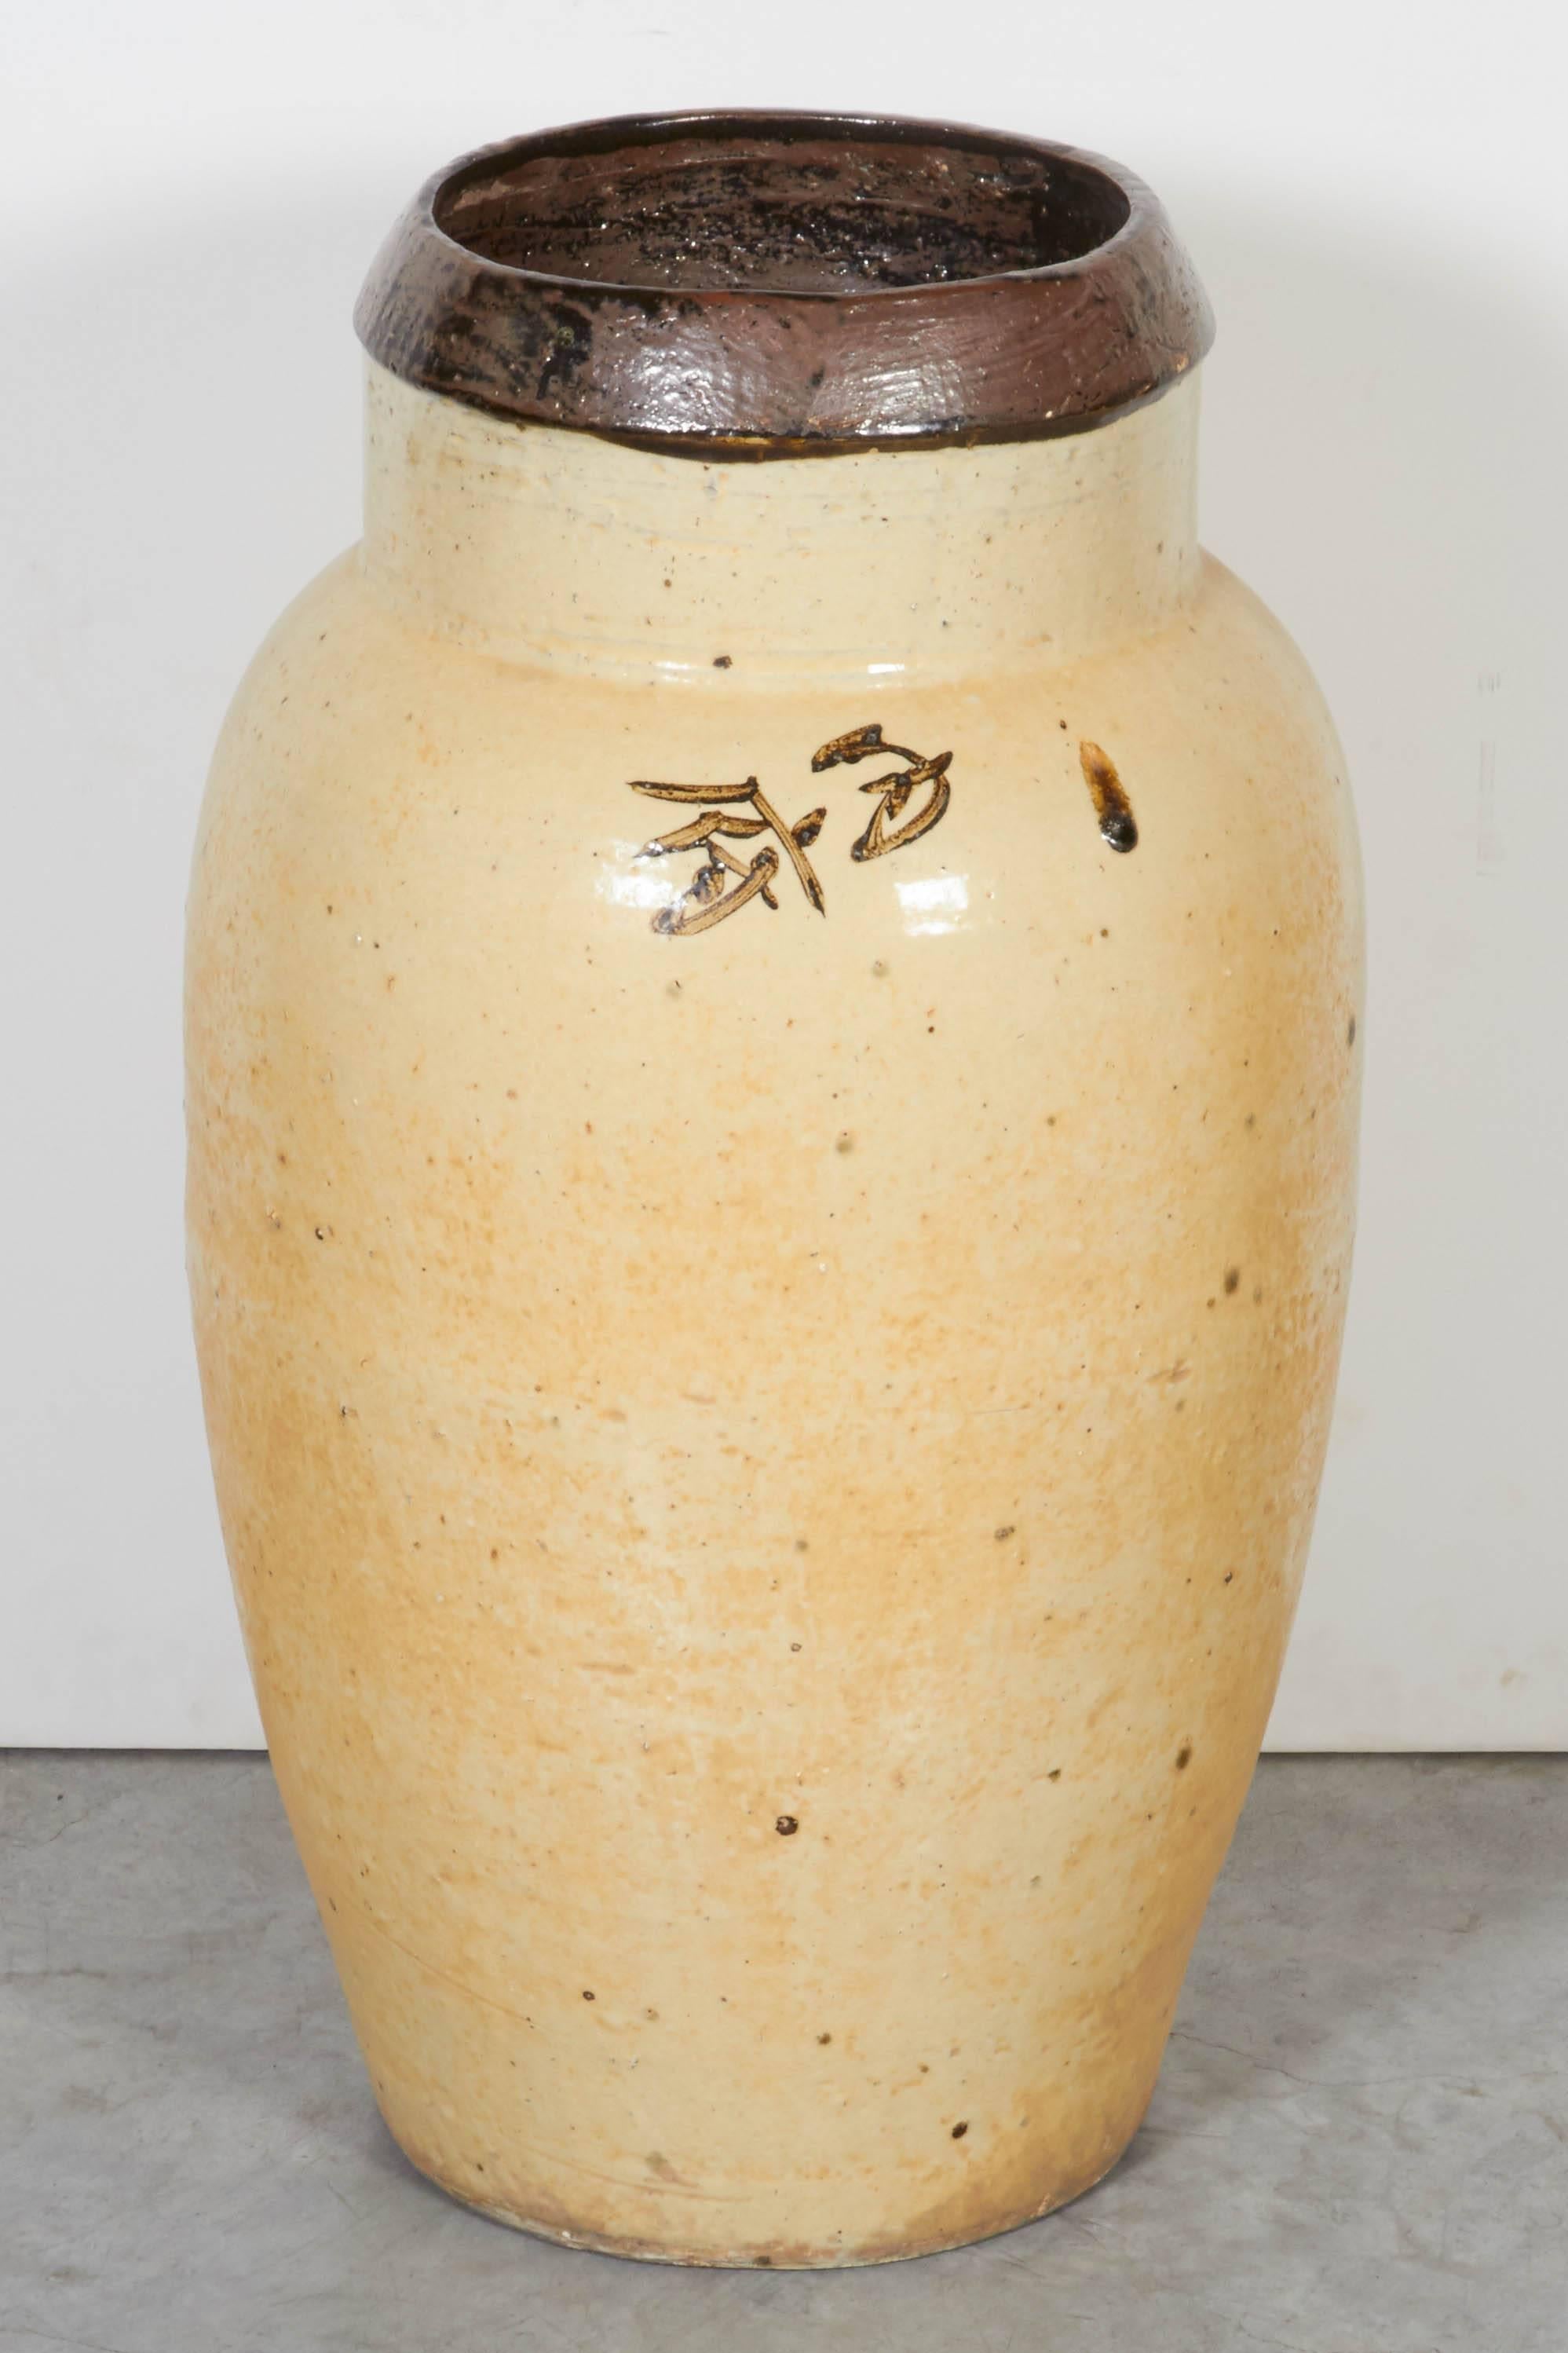 19th century ceramic off-white wine jar, displaying Chinese characters. From Shanxi province, circa 1850.
CR649.